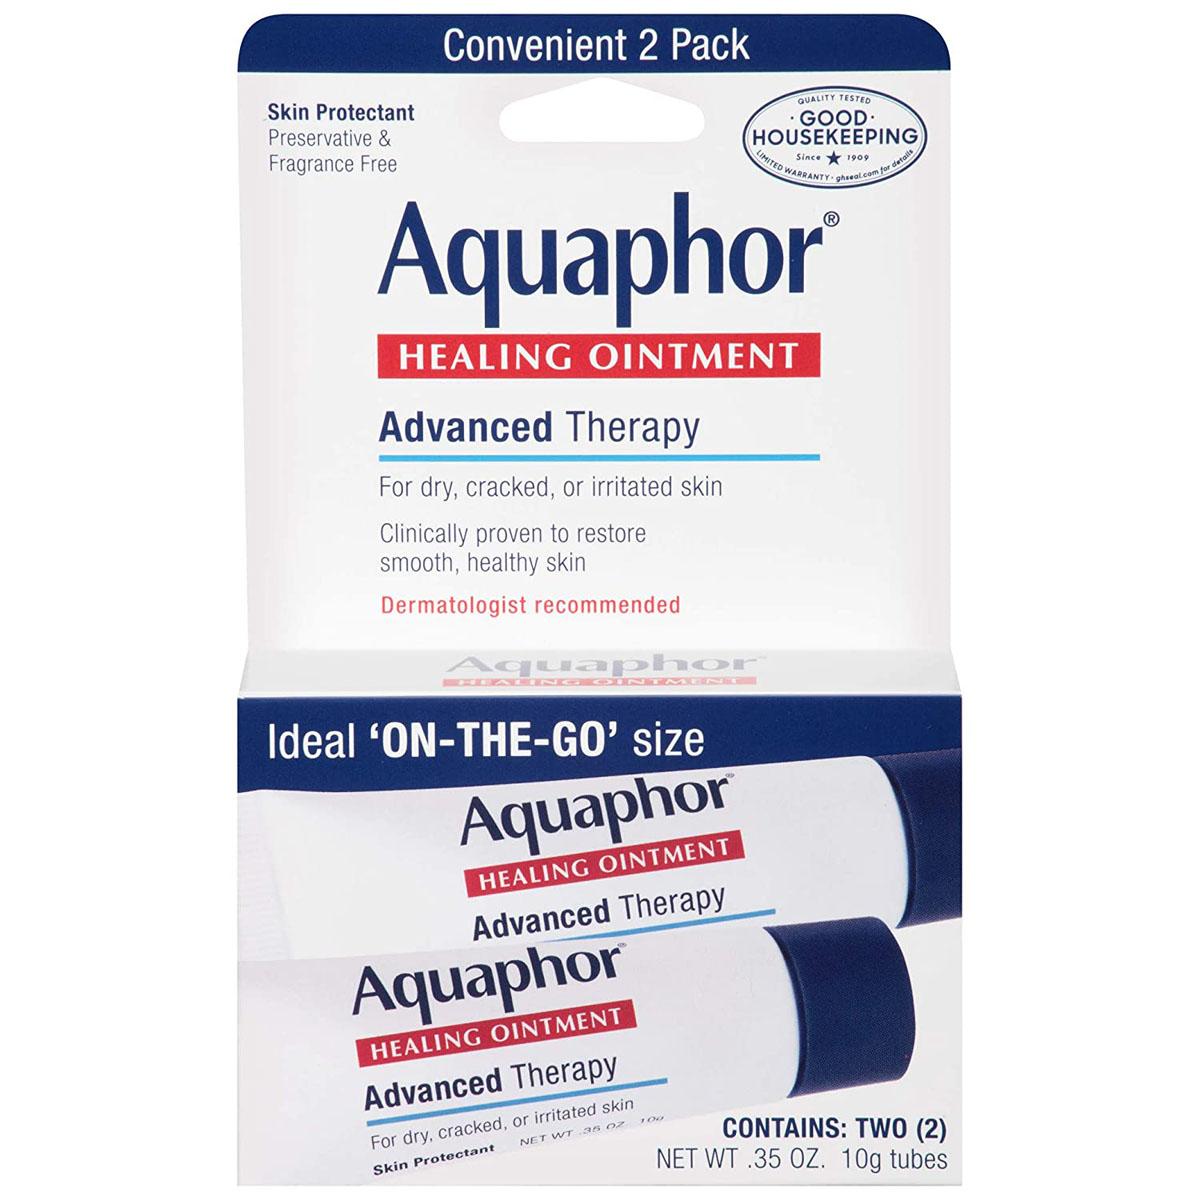 2 Aquaphor Advanced Therapy Healing Ointment To Go for $3.55 Shipped